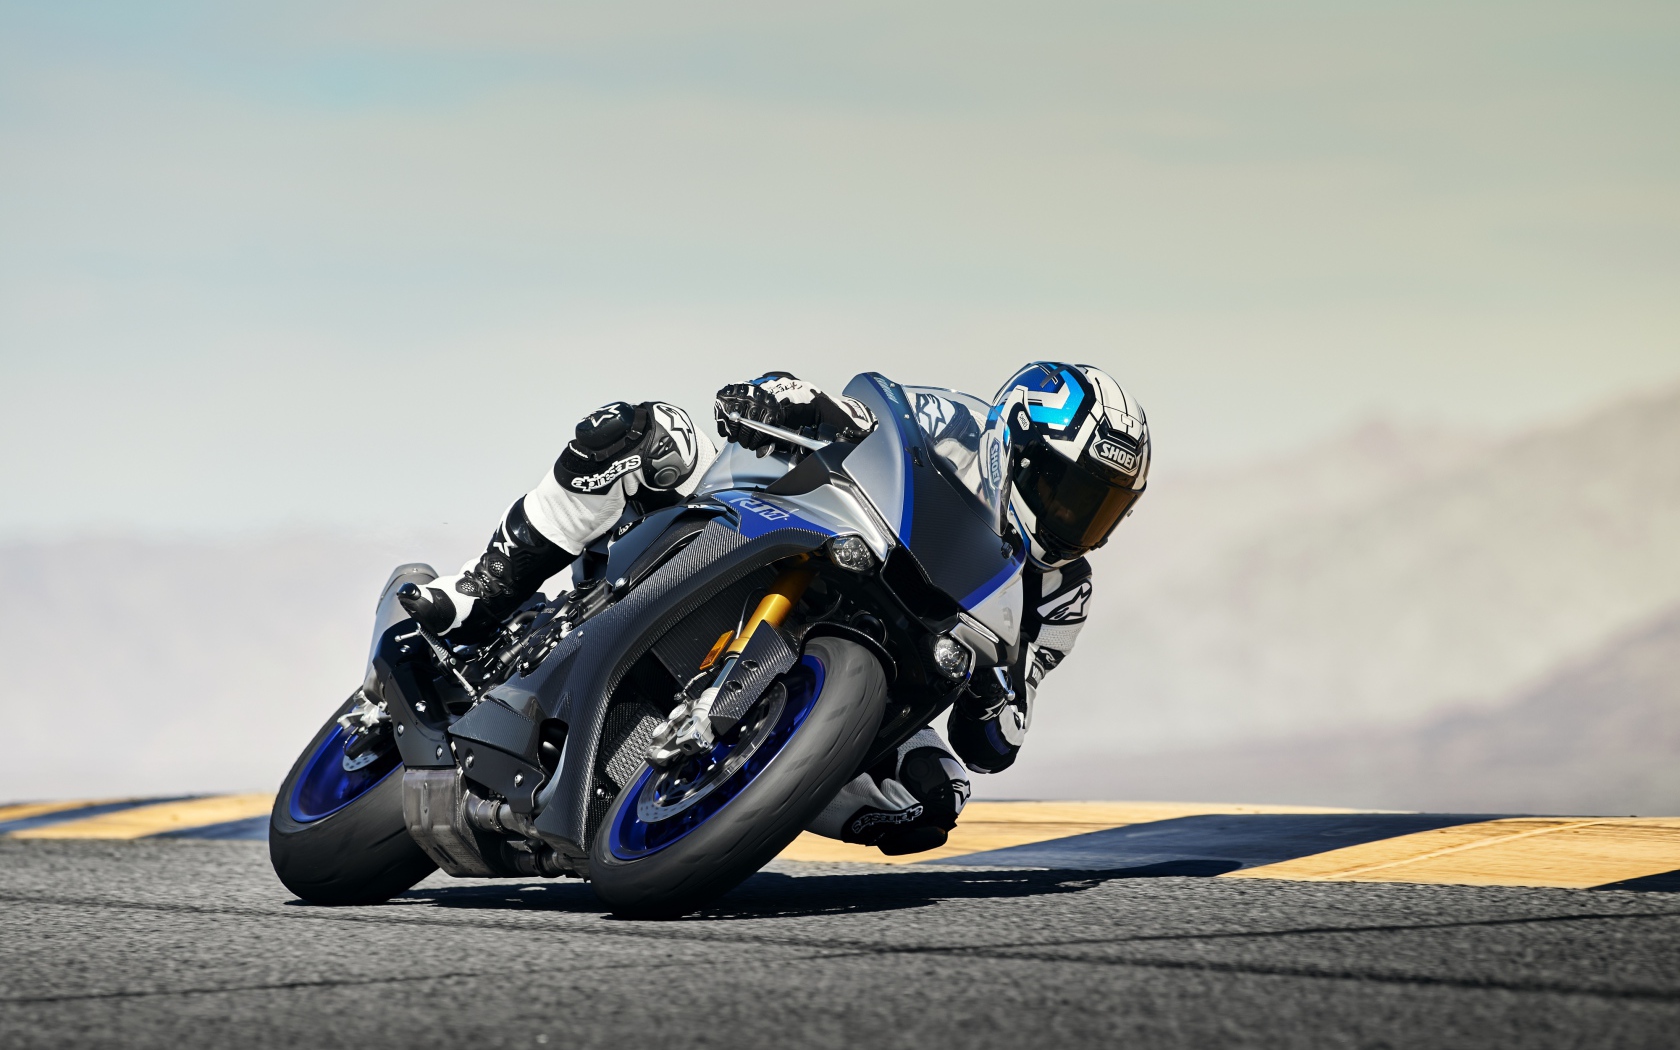 Motorcycle racing on the track on a motorcycle Yamaha YZF-R1M, 2018